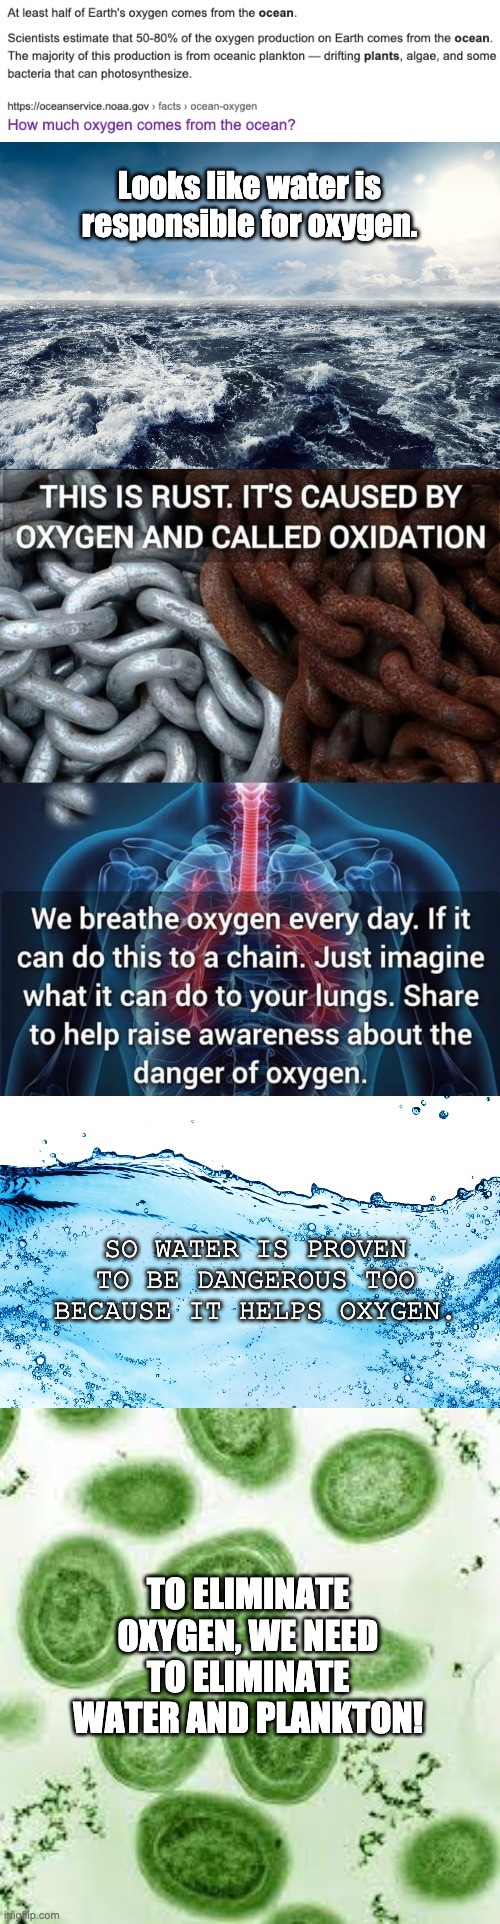 water is responsible for oxygen |  Looks like water is responsible for oxygen. SO WATER IS PROVEN TO BE DANGEROUS TOO BECAUSE IT HELPS OXYGEN. TO ELIMINATE OXYGEN, WE NEED TO ELIMINATE WATER AND PLANKTON! | image tagged in memes,oxygen,ocean,plankton,water | made w/ Imgflip meme maker